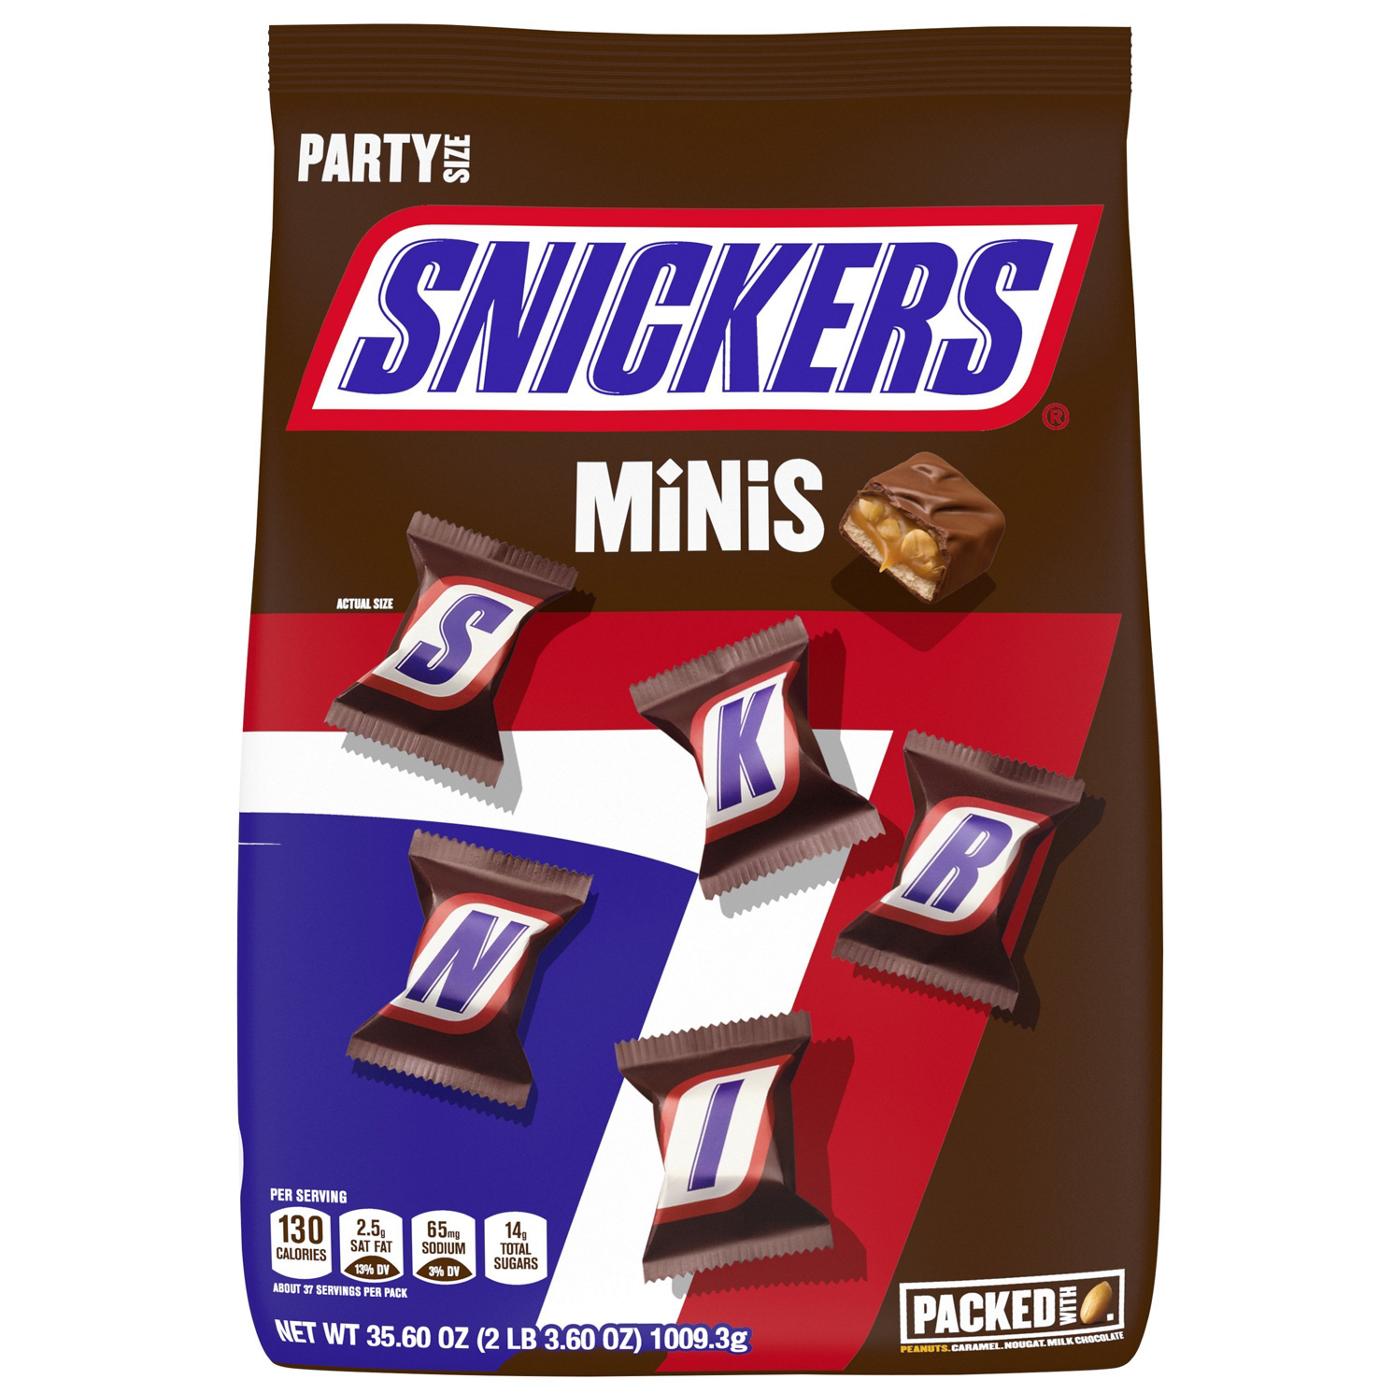 Snickers Minis Chocolate Candy Bars - Party Size; image 1 of 3